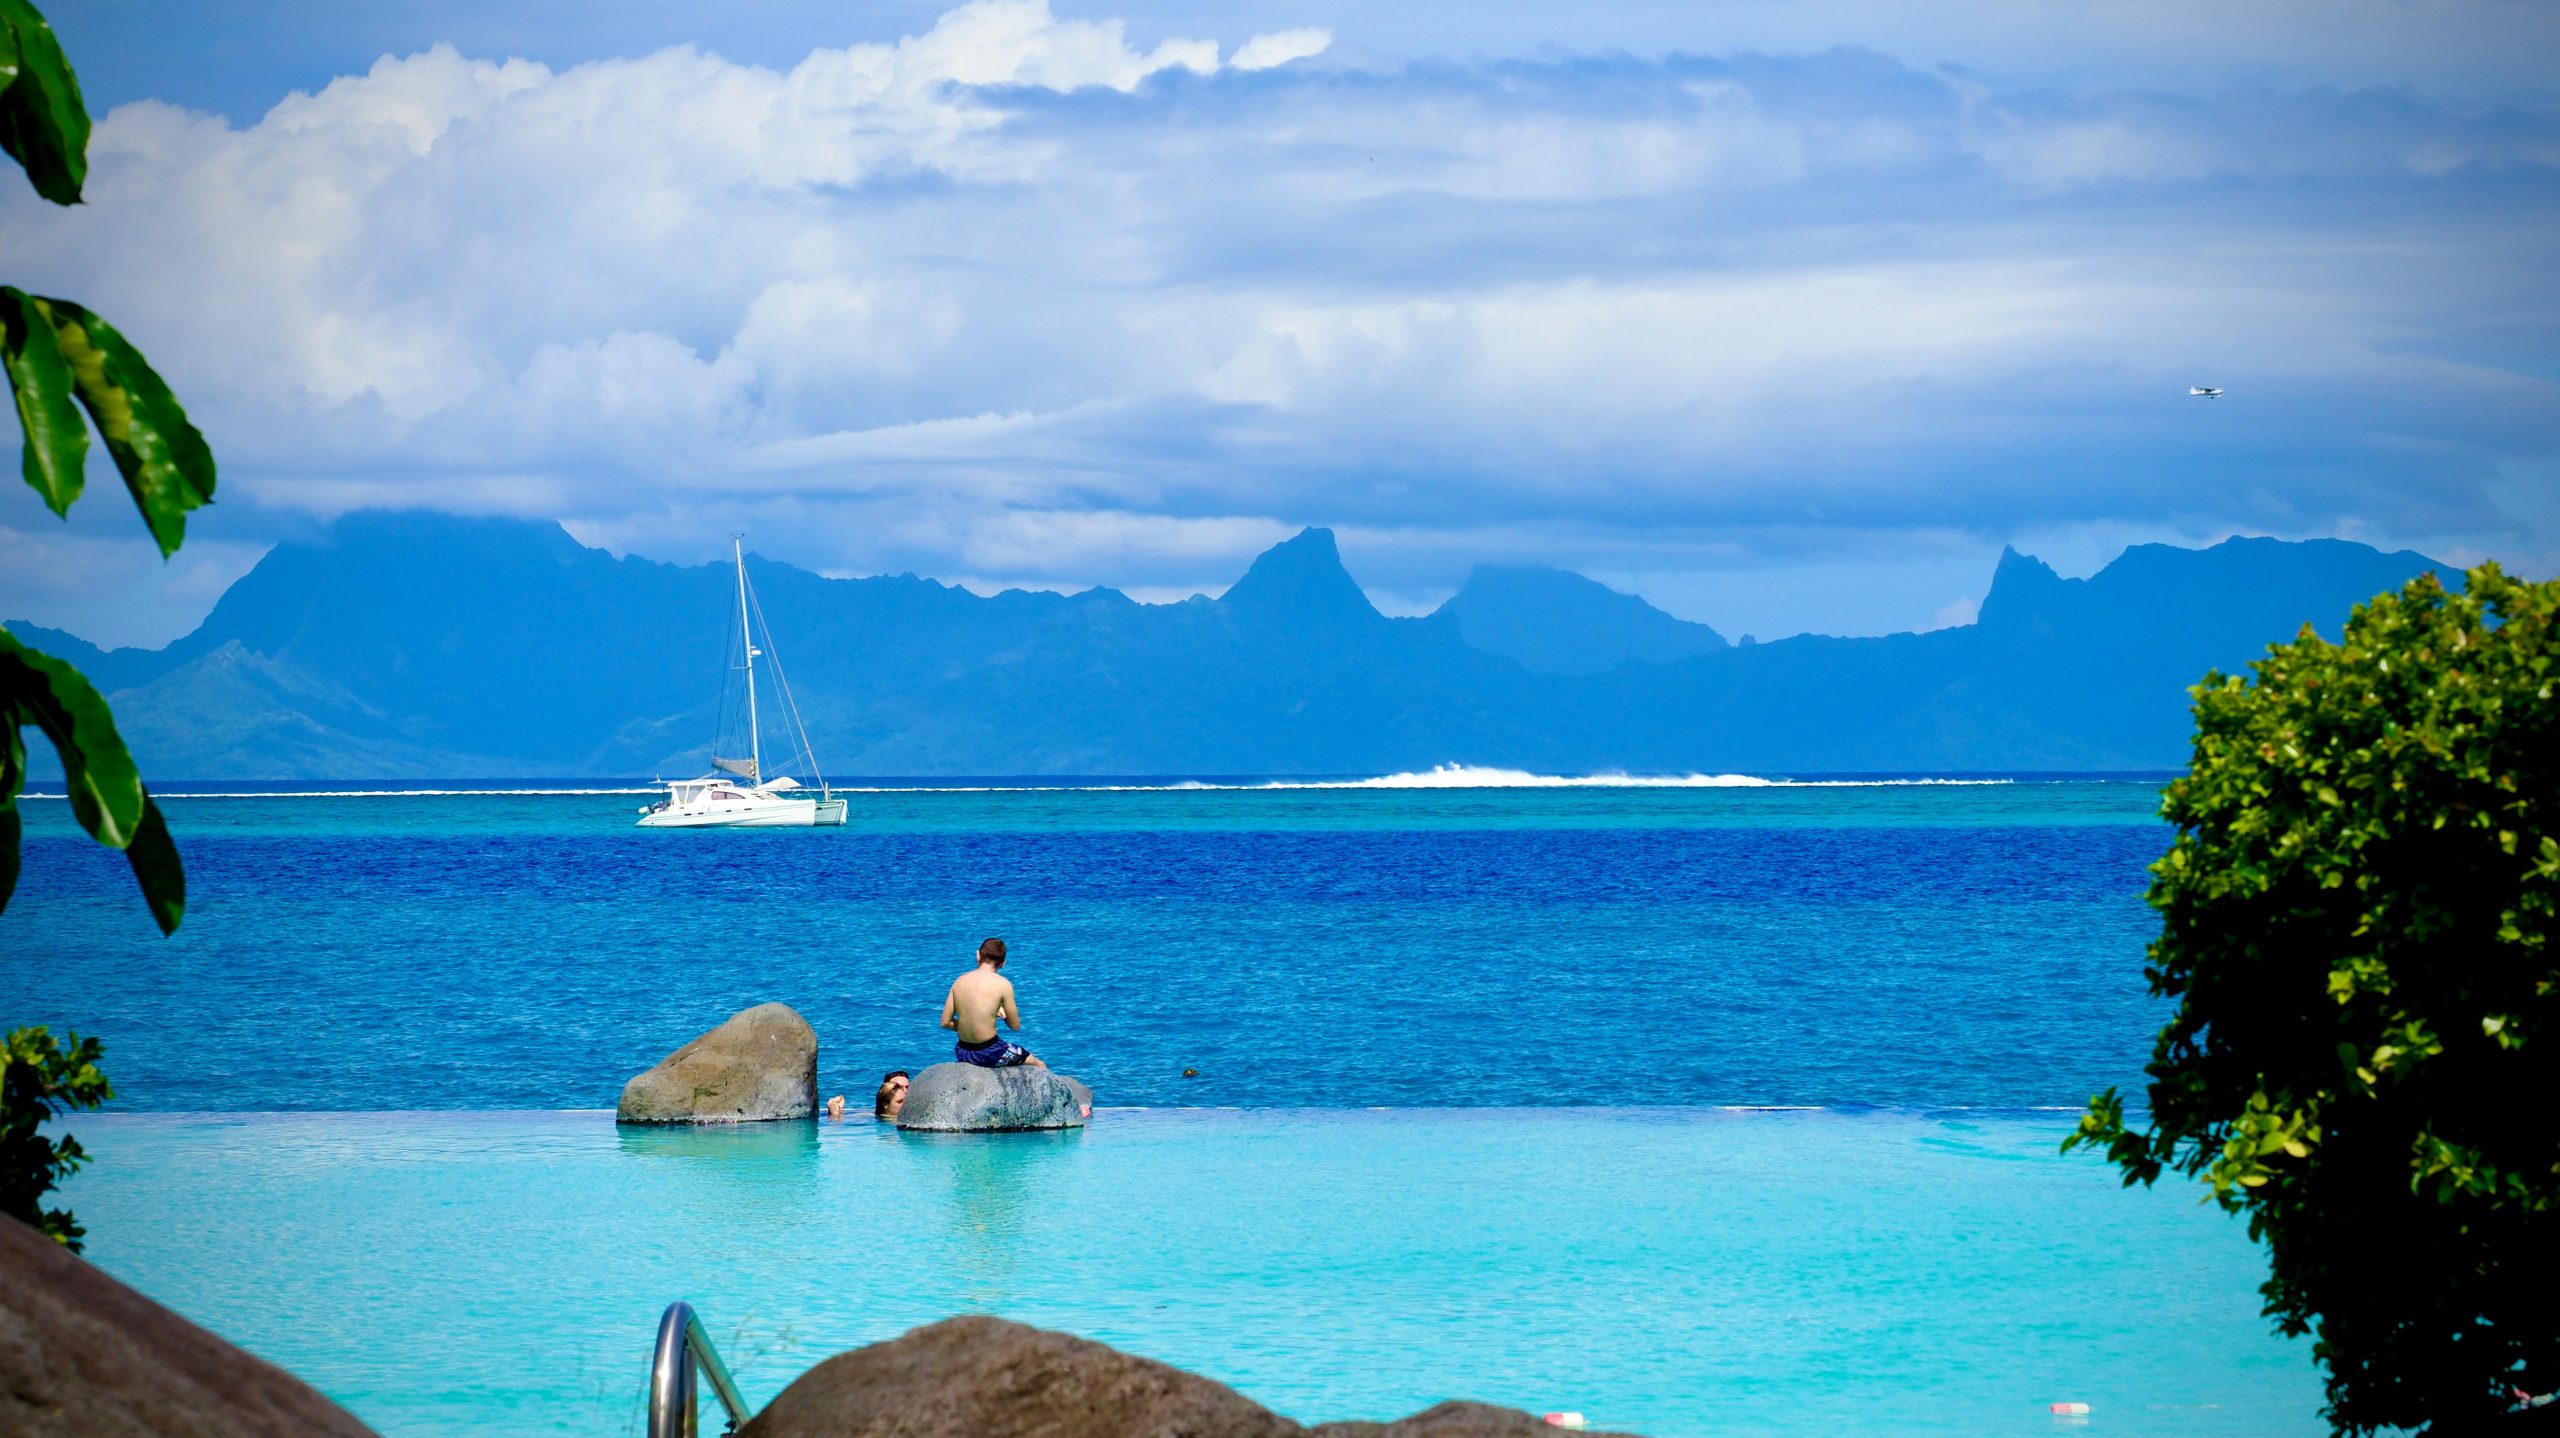 discover the magic of tahiti with tahiti tourism: plan your dream vacation, explore stunning beaches, indulge in rich polynesian culture, and experience a tropical paradise like no other.